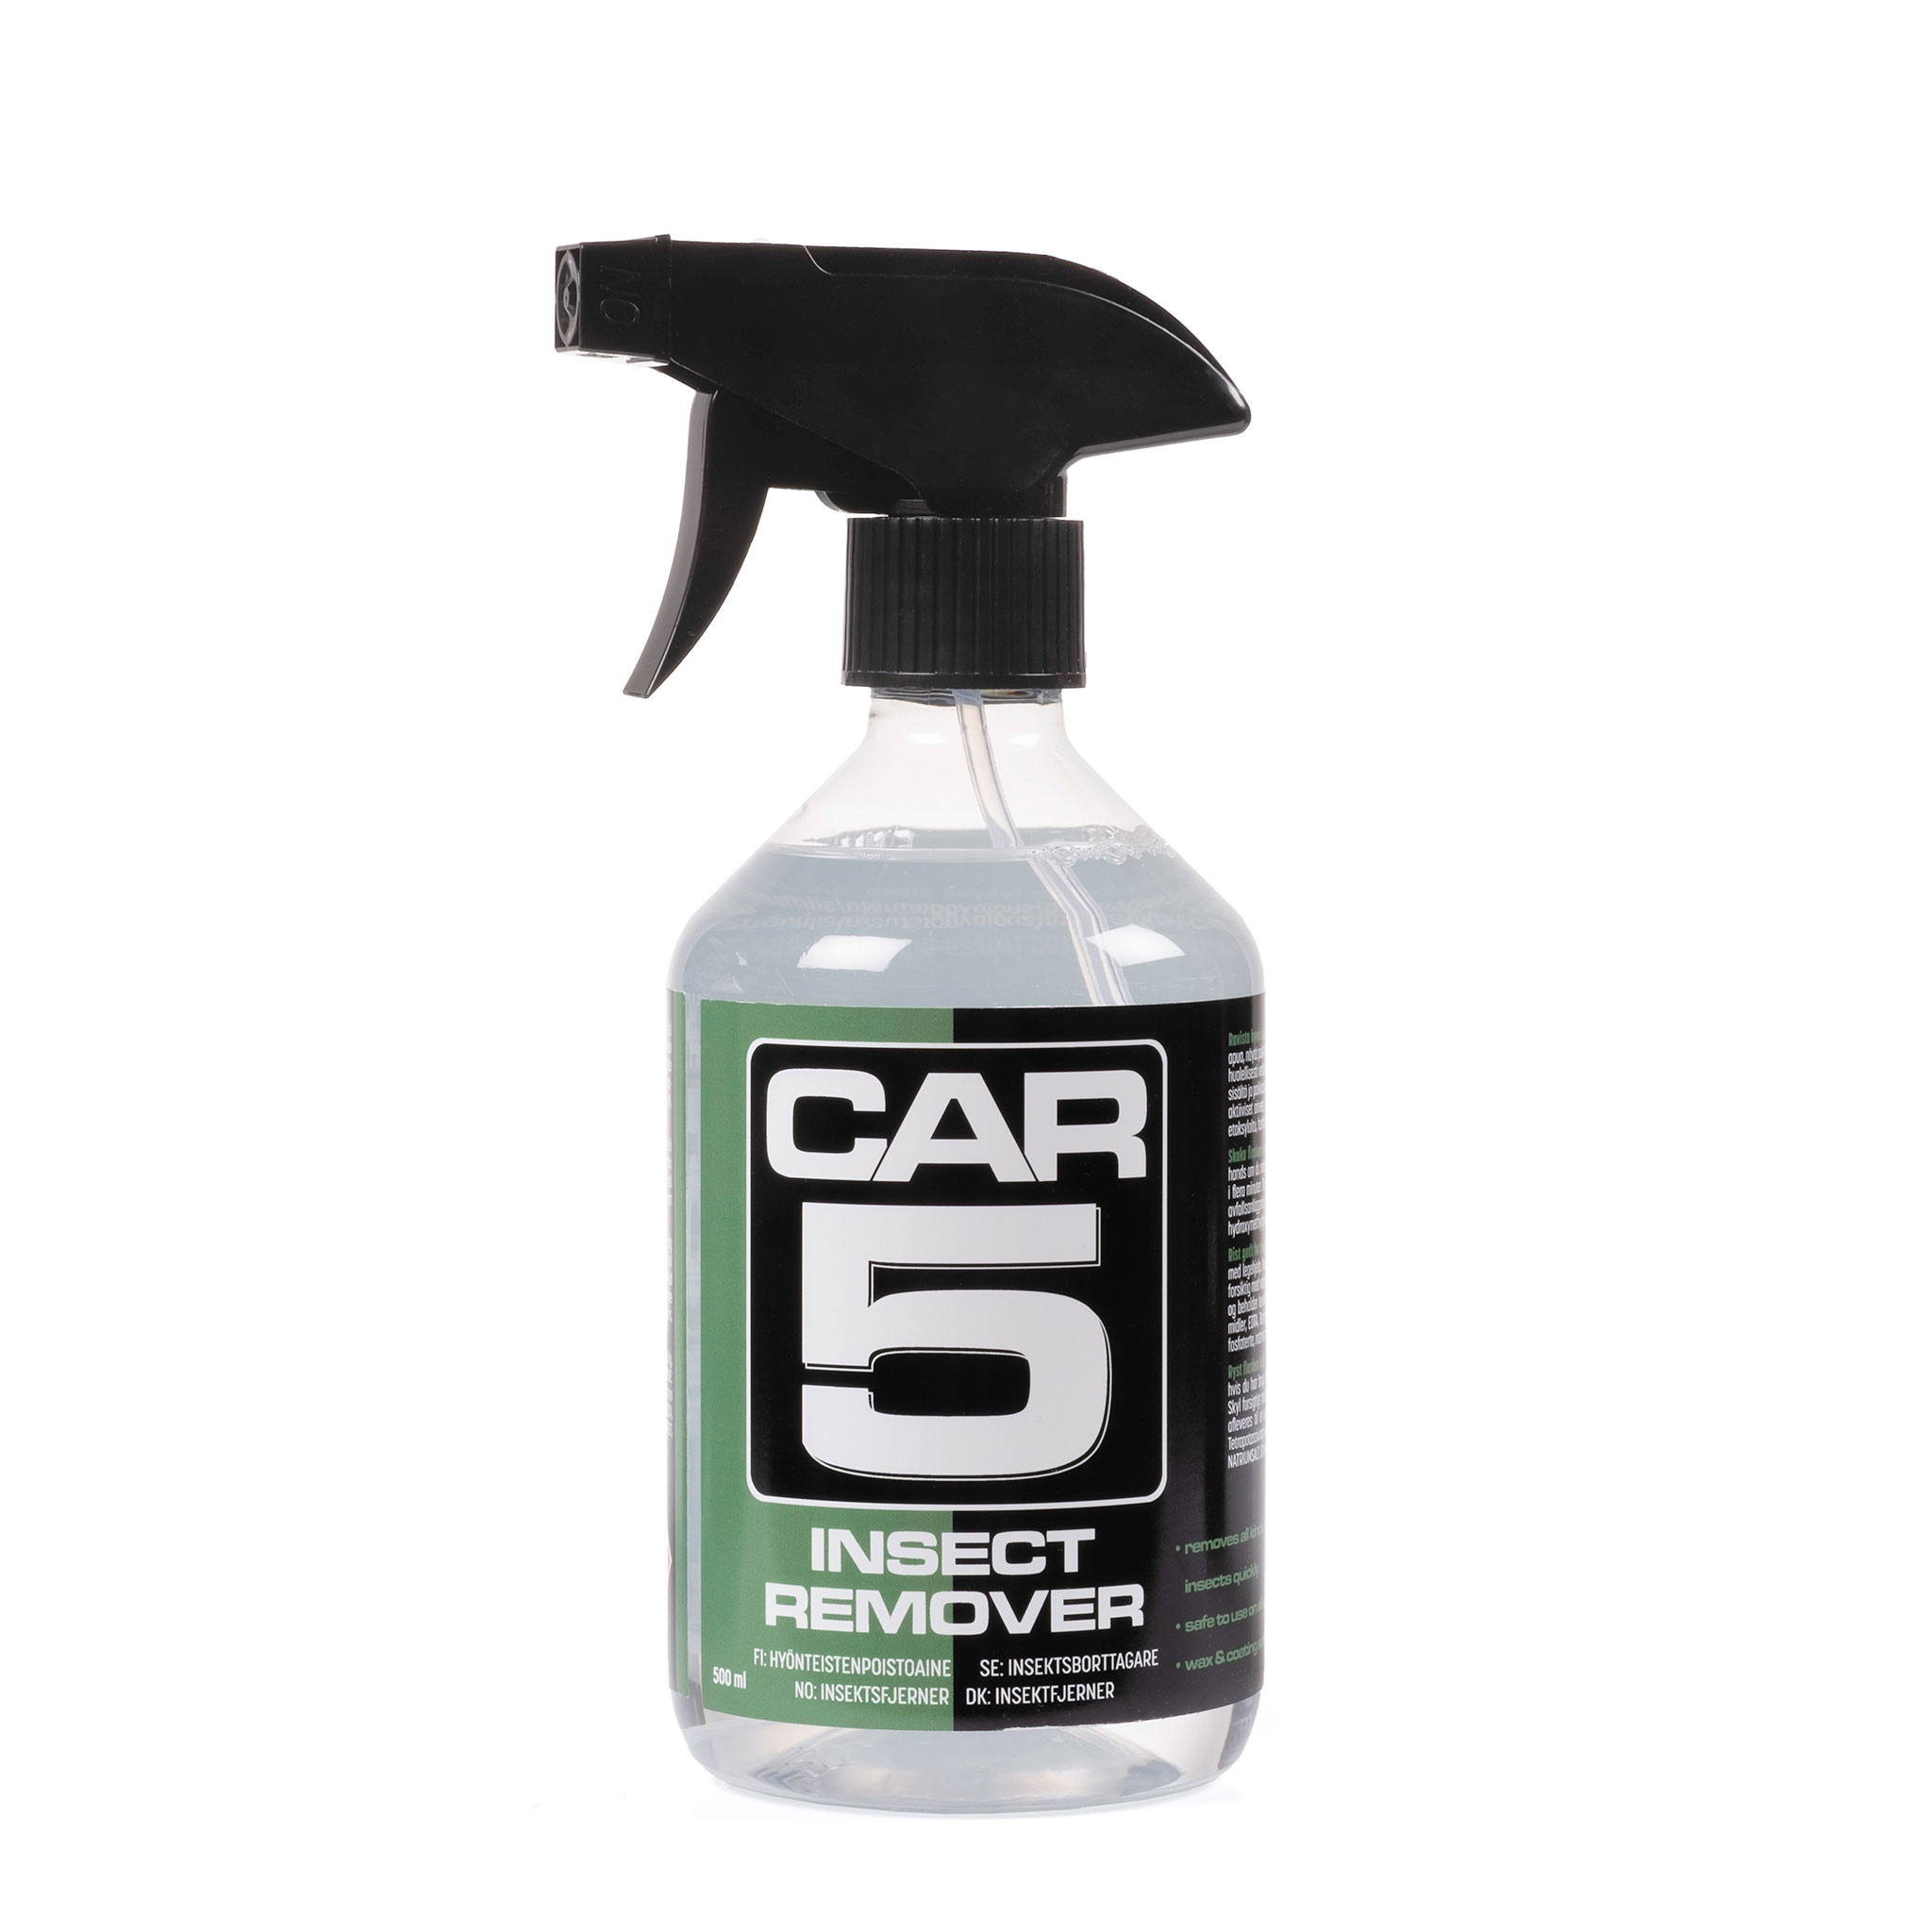 Insektfjerner CAR5 Insect Remover, 500 ml